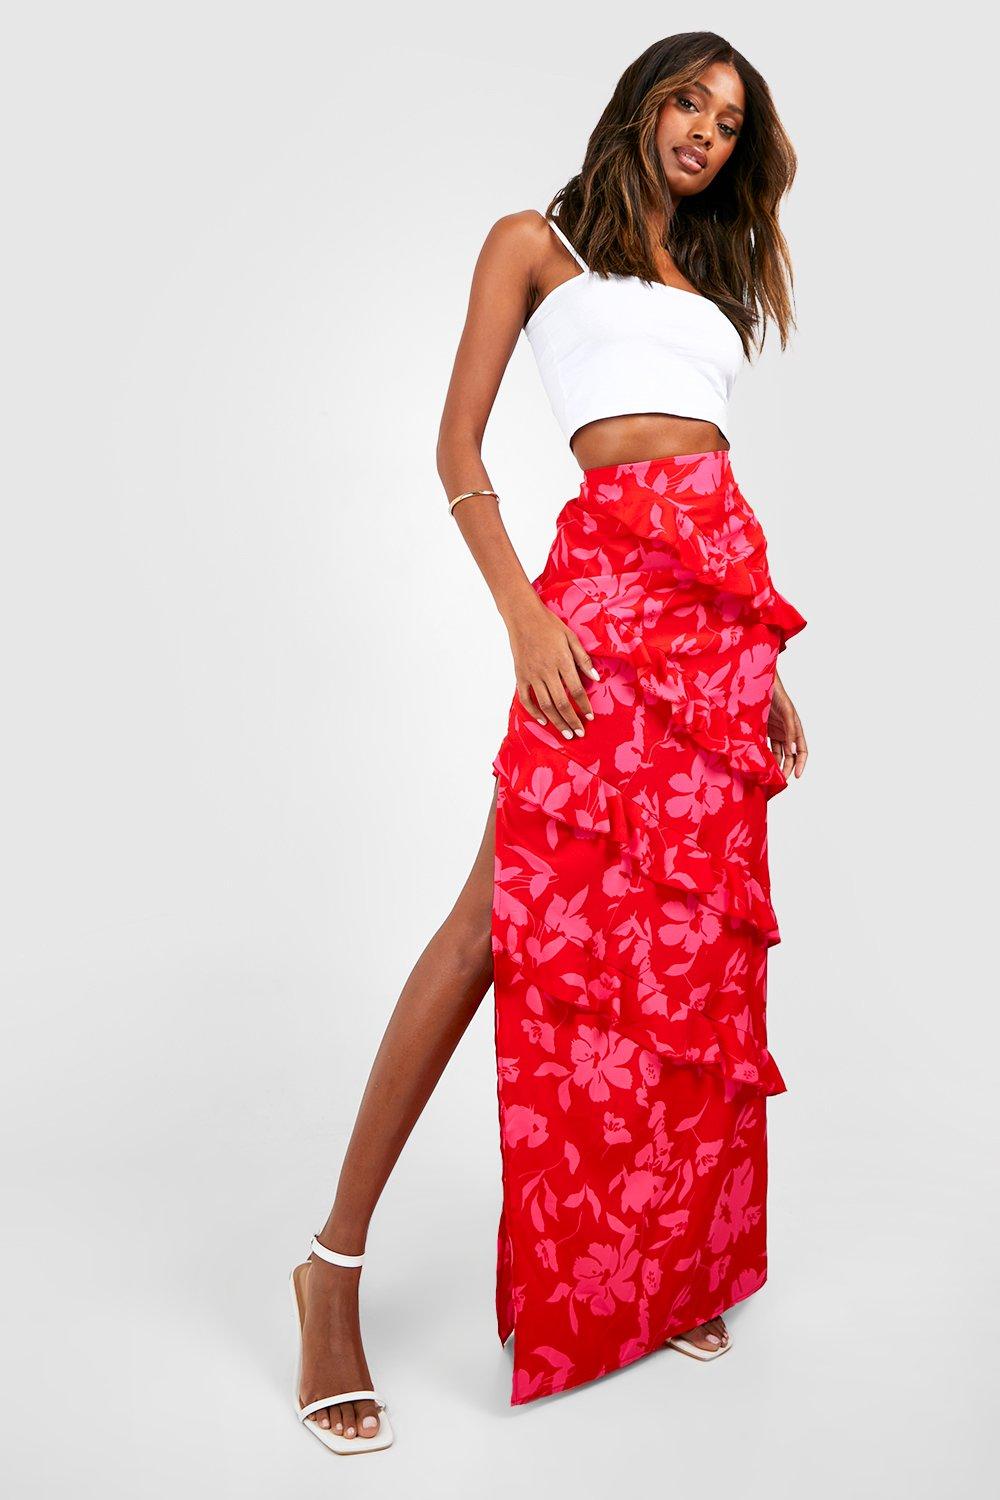 Floral Maxi Maternity Skirt NZ - The Most Comfortable Skirt